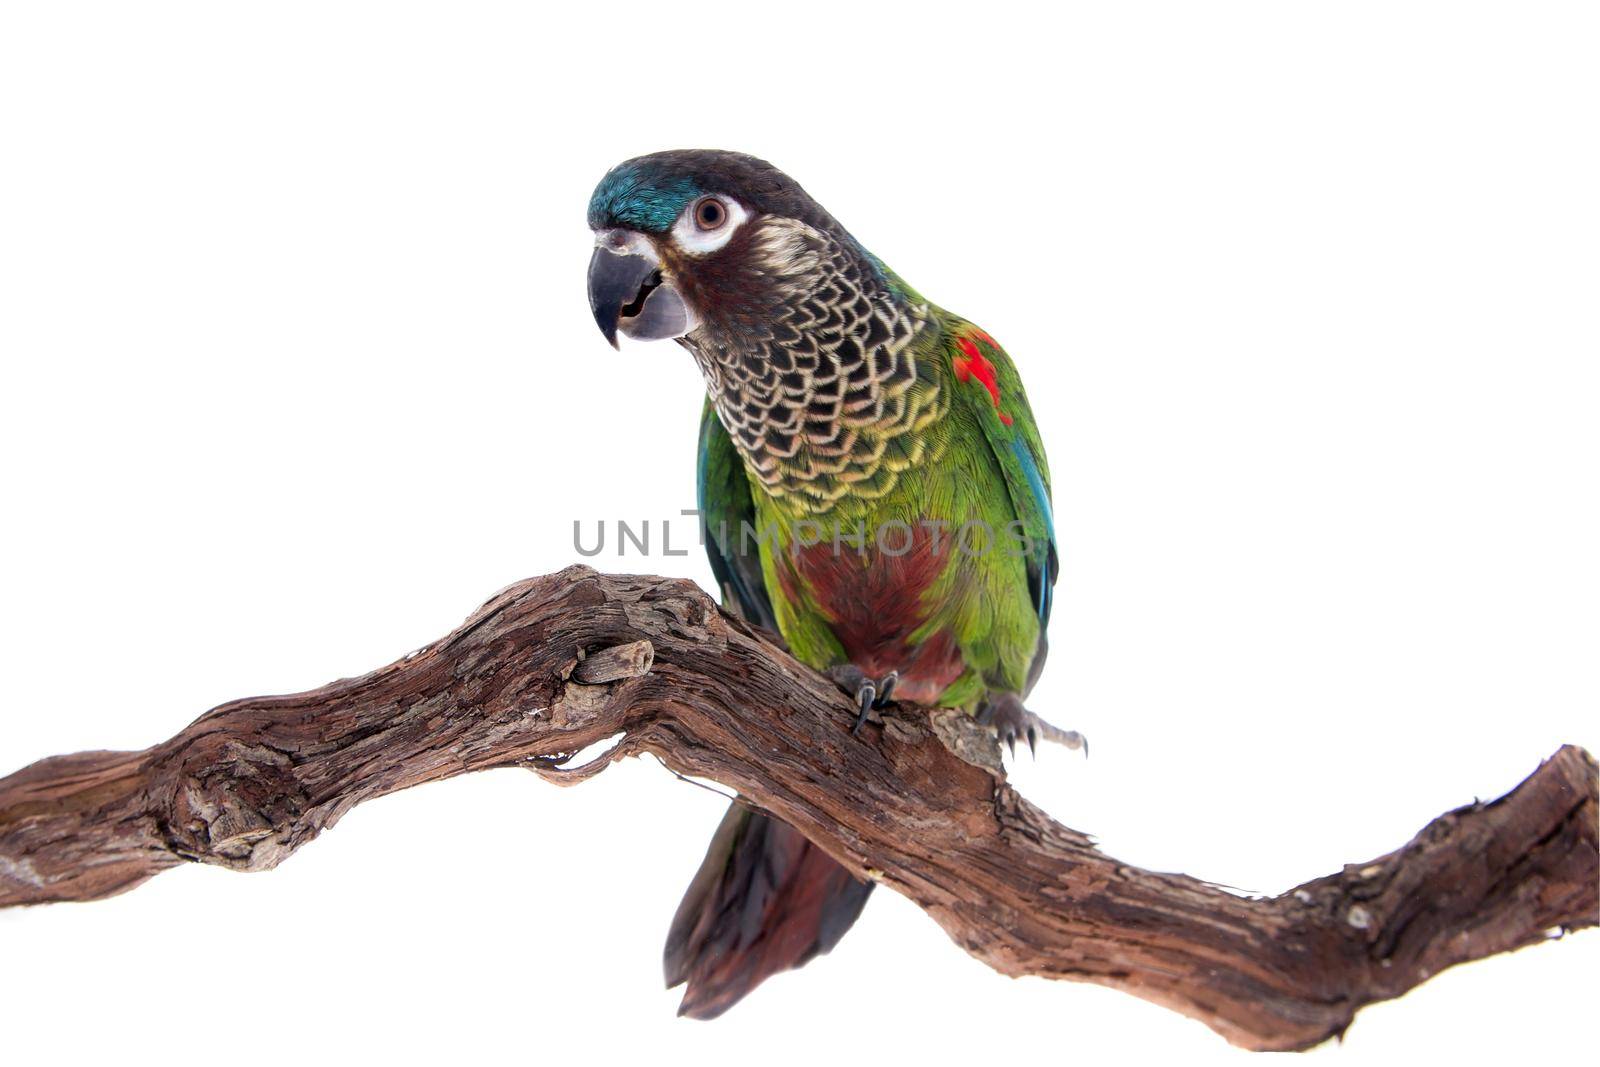 The painted conure, pyrrhura picta, on white by RosaJay